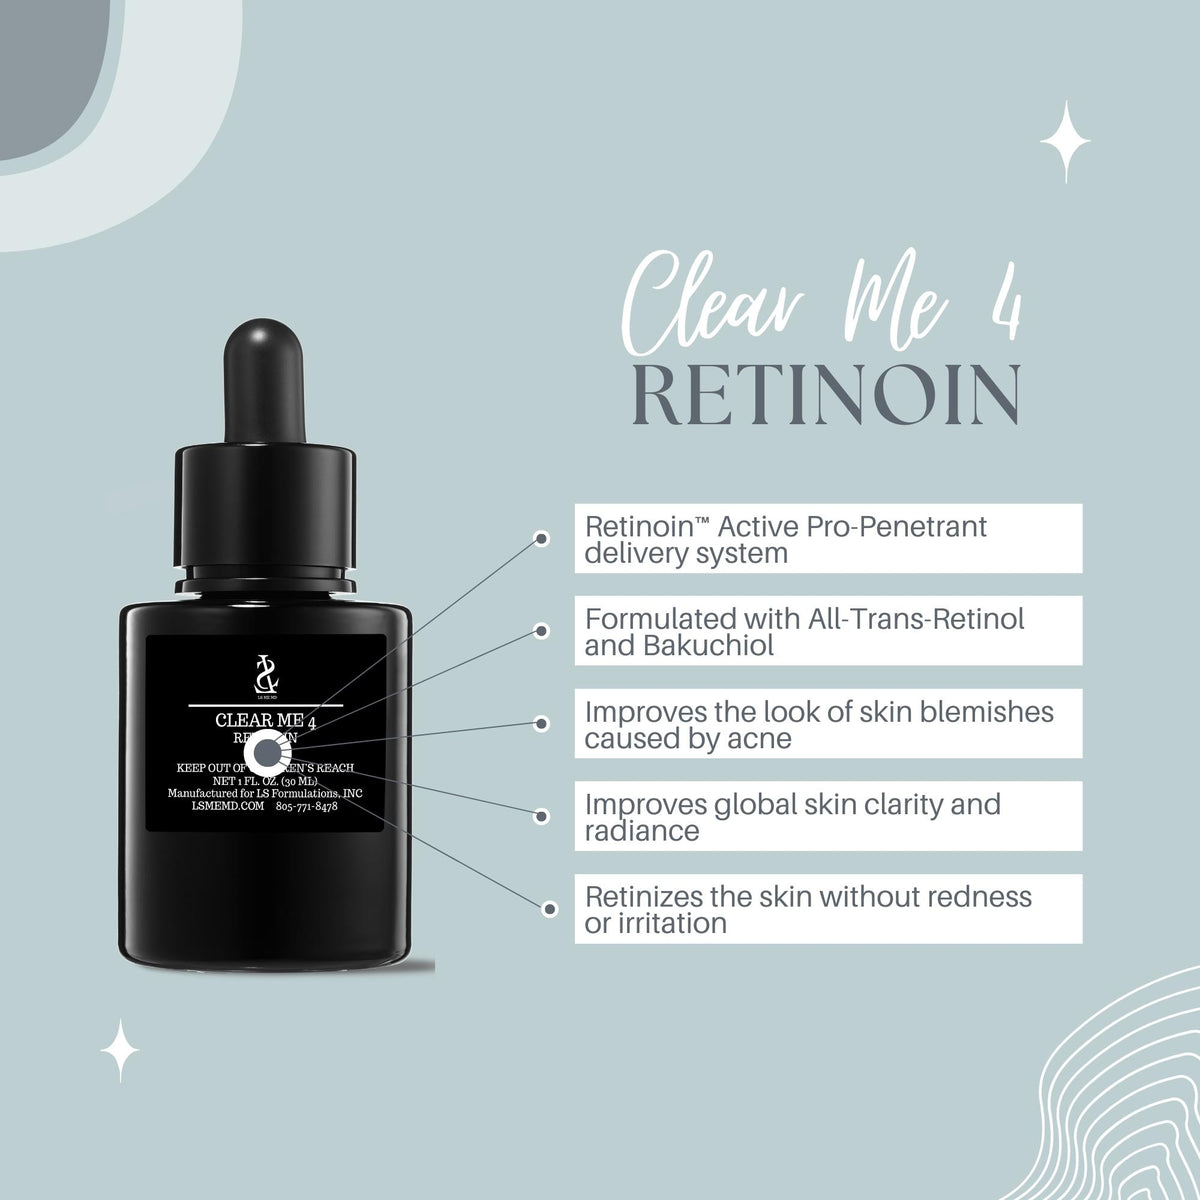 CLEAR ME 4: RETINOIN